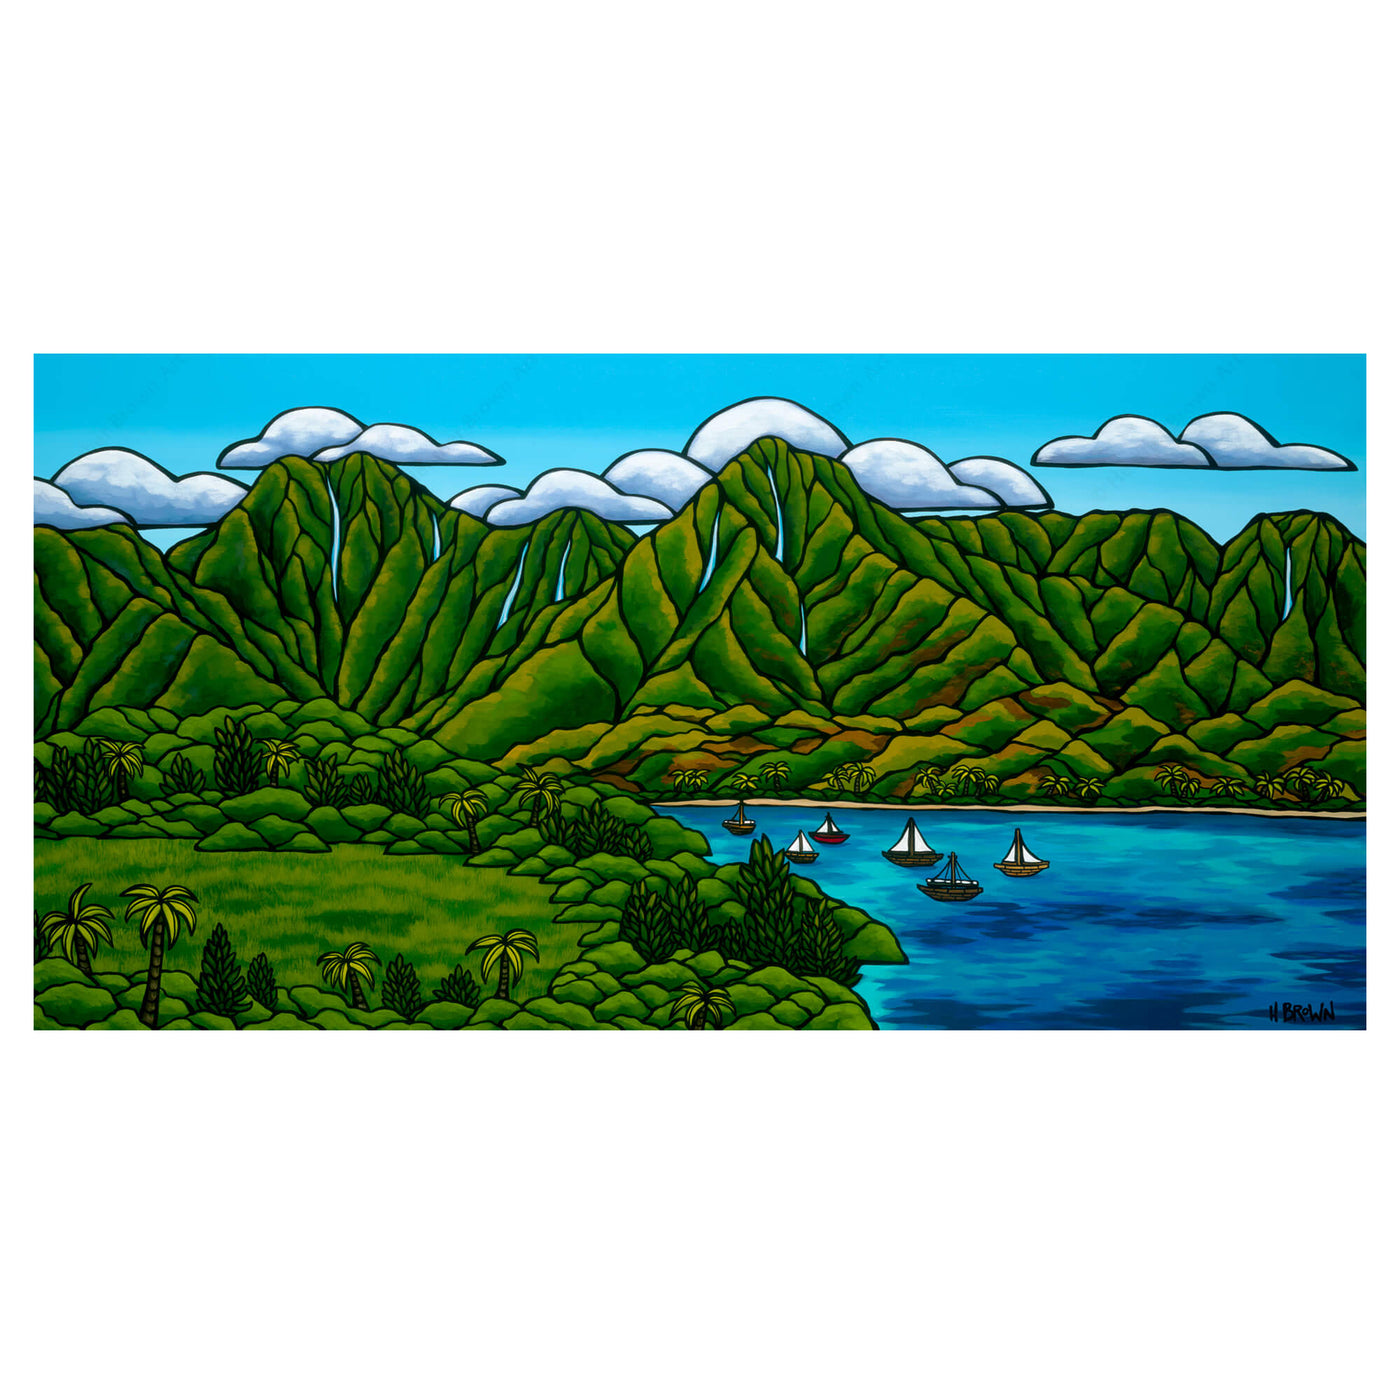 Green seascape with mountains, and sailboats on shore by Hawaii surf artist Heather Brown